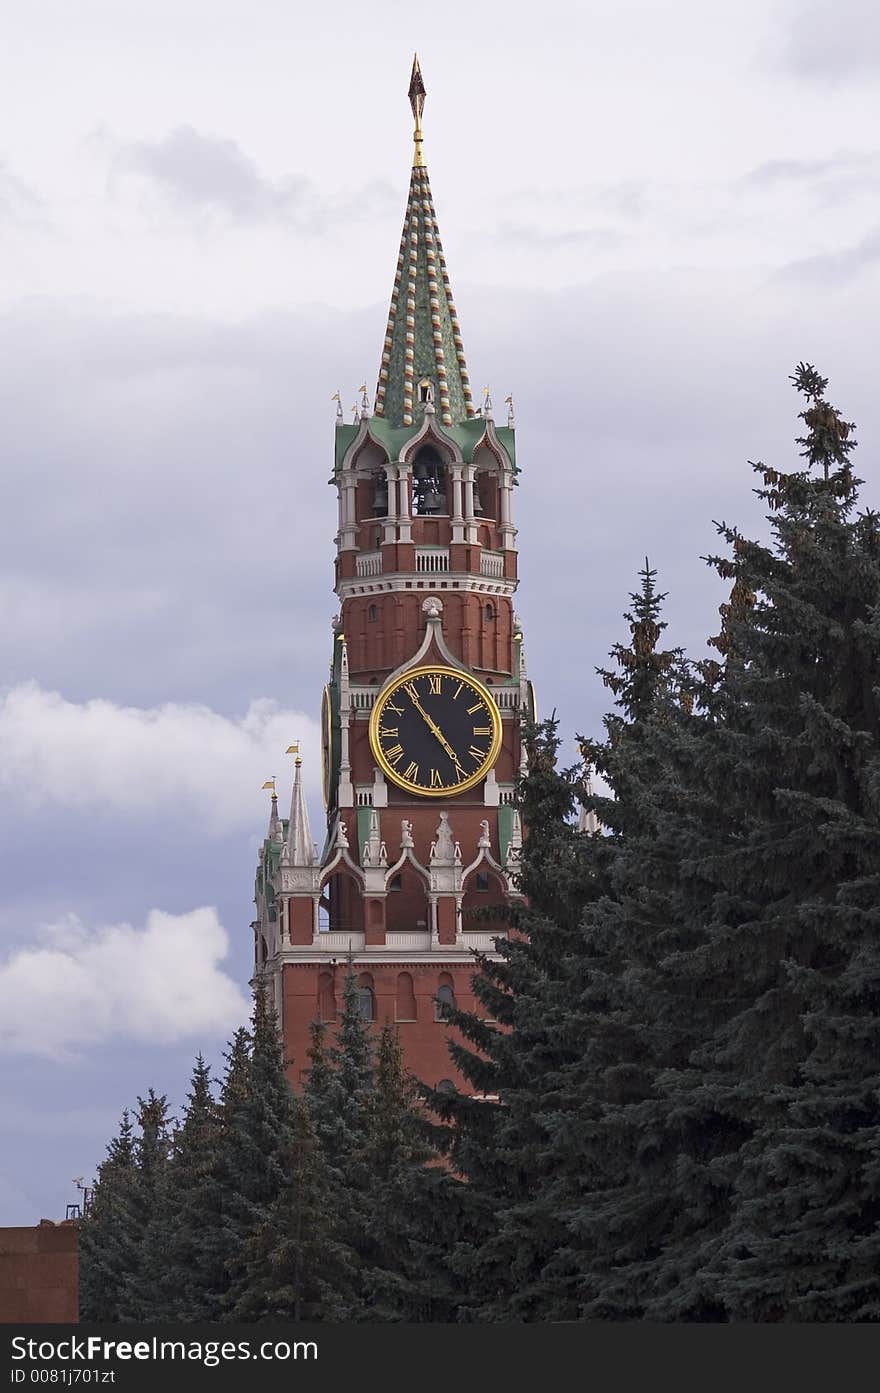 The Spasskaya Tower of Moscow Kremlin was built in 1491 by Italian architect Petro Antonio Solari. It's gate has always been the main entrance to Kremlin. The Spasskye Gate was used for royal and patriarchal processions as well as for foreign ambassadors reception.